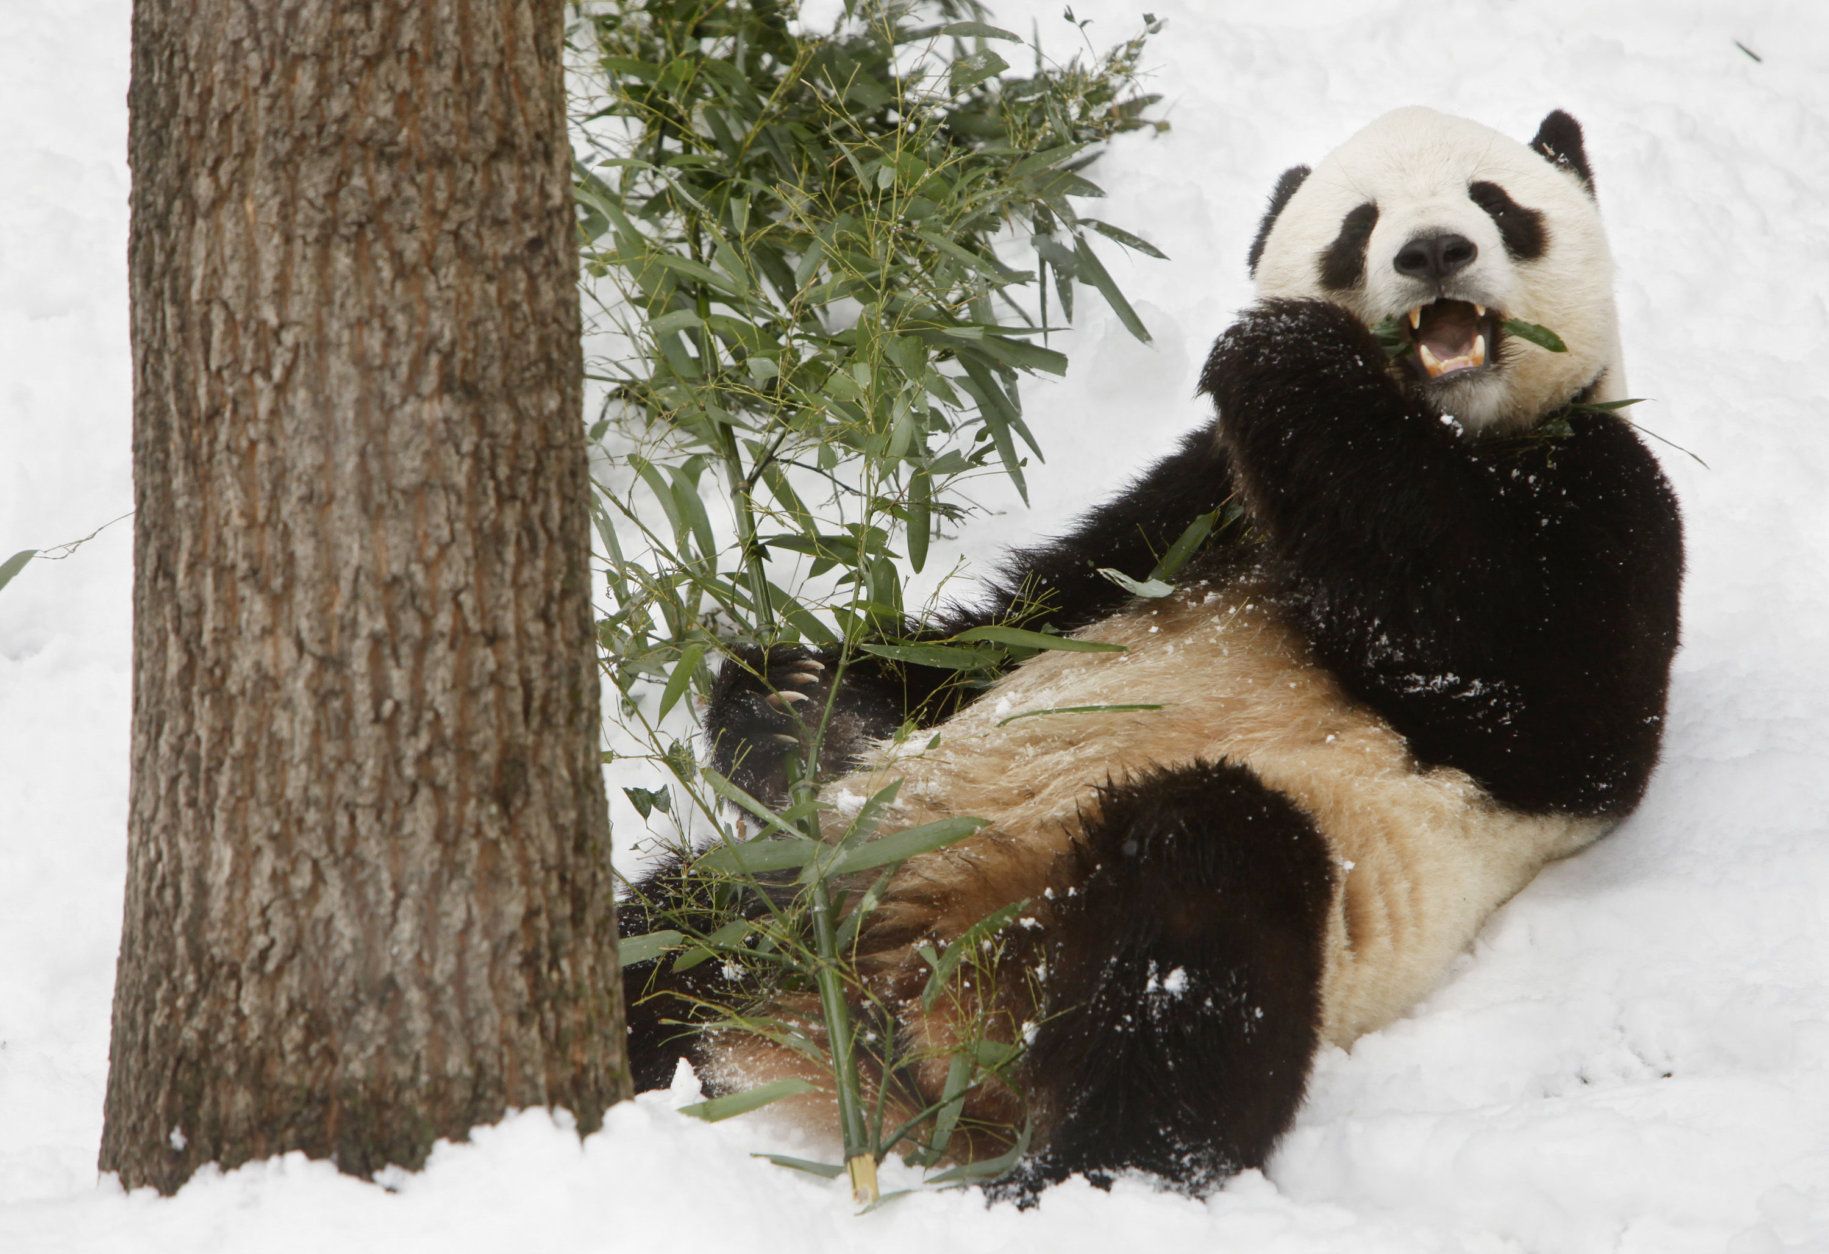 Panda Tai Shan, 4, is seen on his last day at the National Zoo in Washington, on Wednesday, Feb. 3, 2010. Tai Shan, who was born at the zoo in 2005, will be sent to China on Thursday to become part of a breeding program. Under the Smithsonian's panda loan agreement, any cub born at the zoo must be returned to China for breeding. (AP Photo/Jacquelyn Martin)